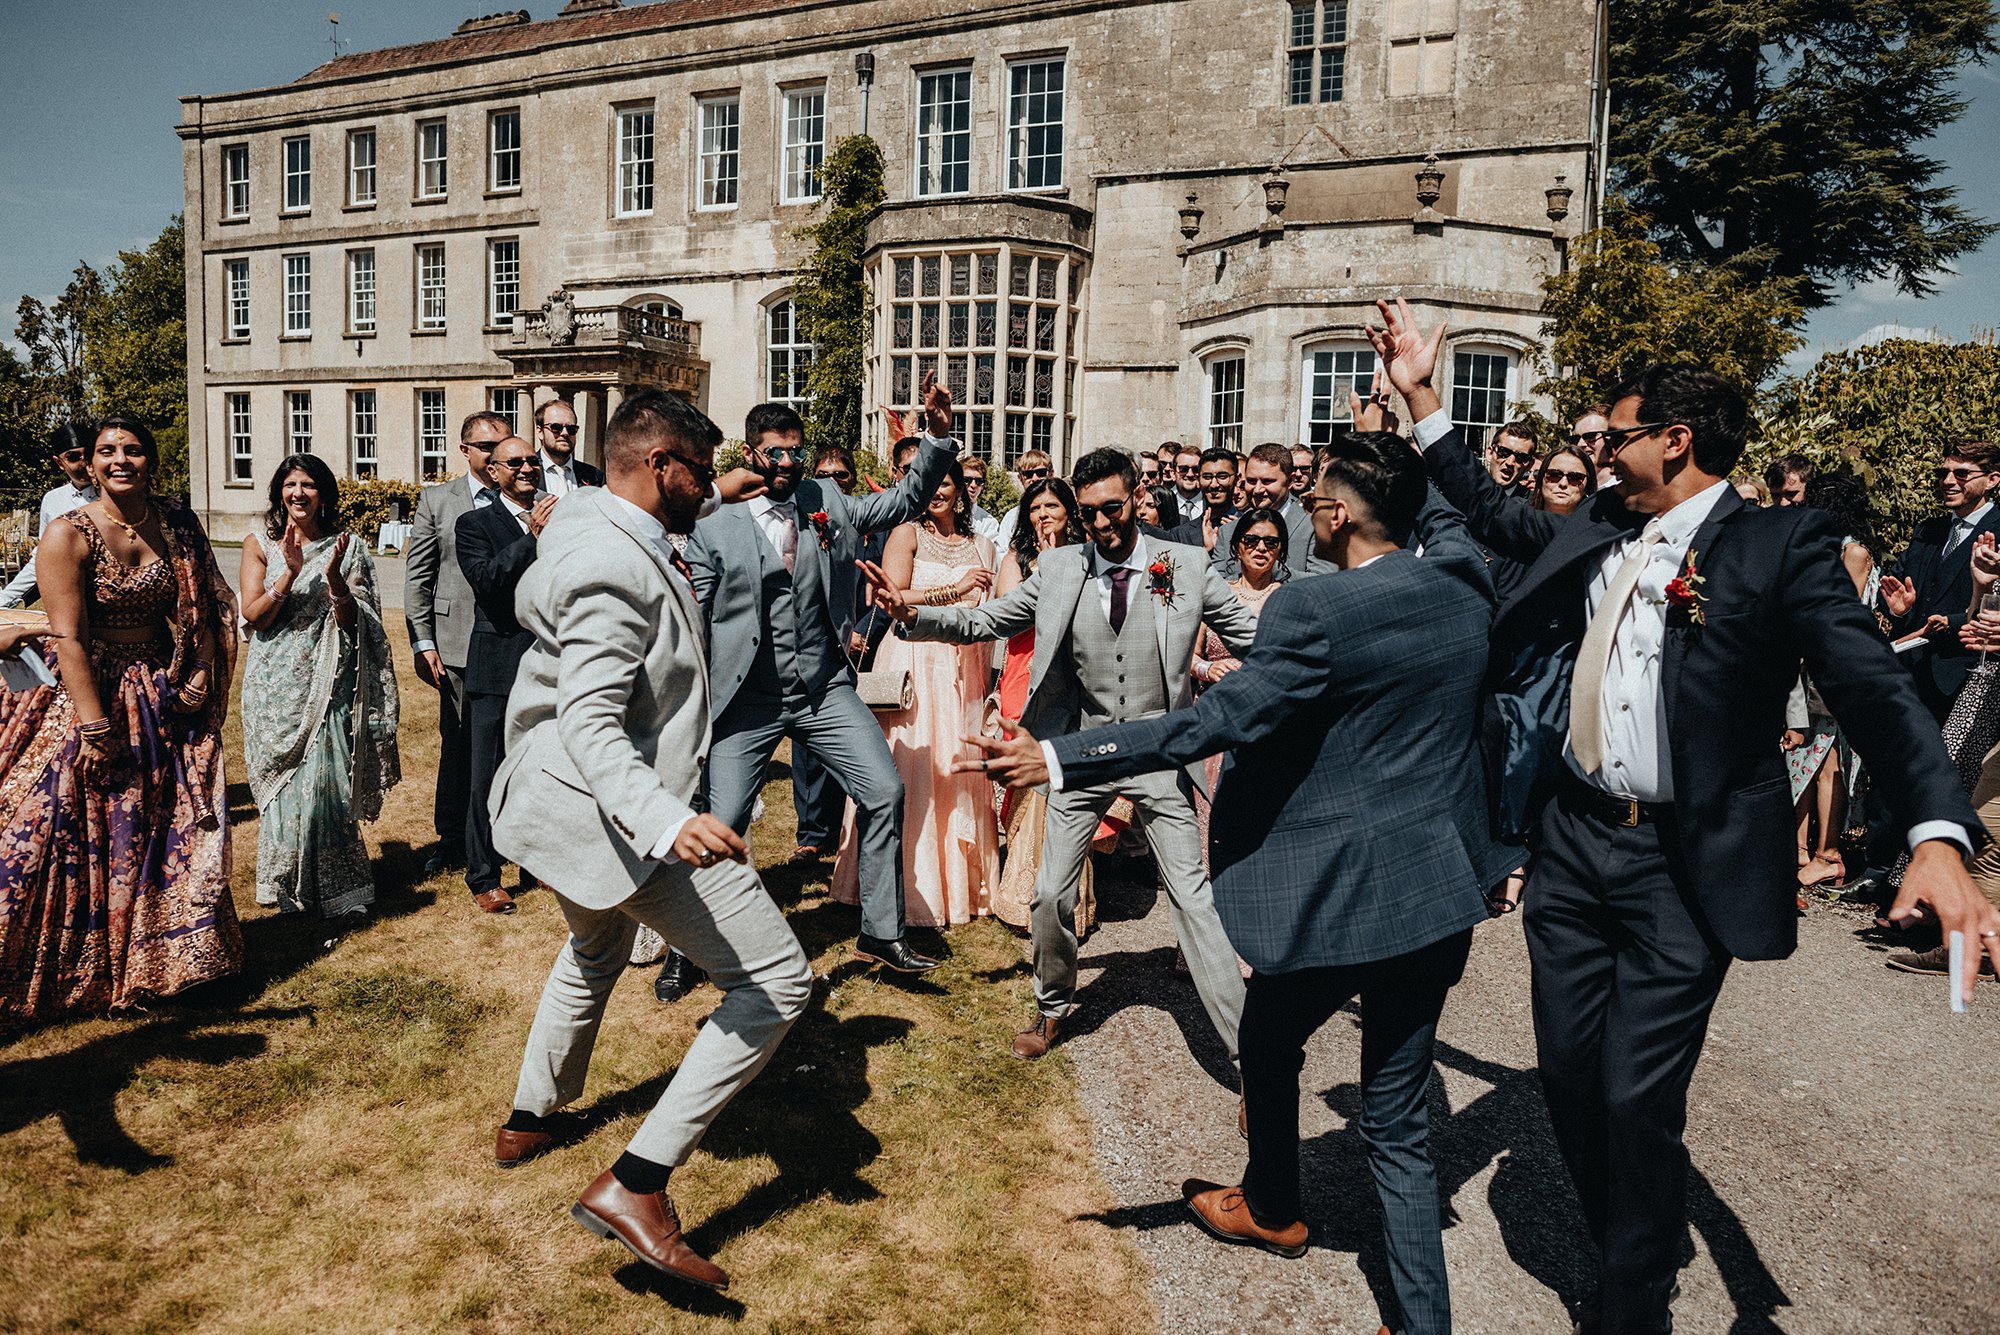 guests dancing in front of stately home for a party wedding with outdoor ceremony